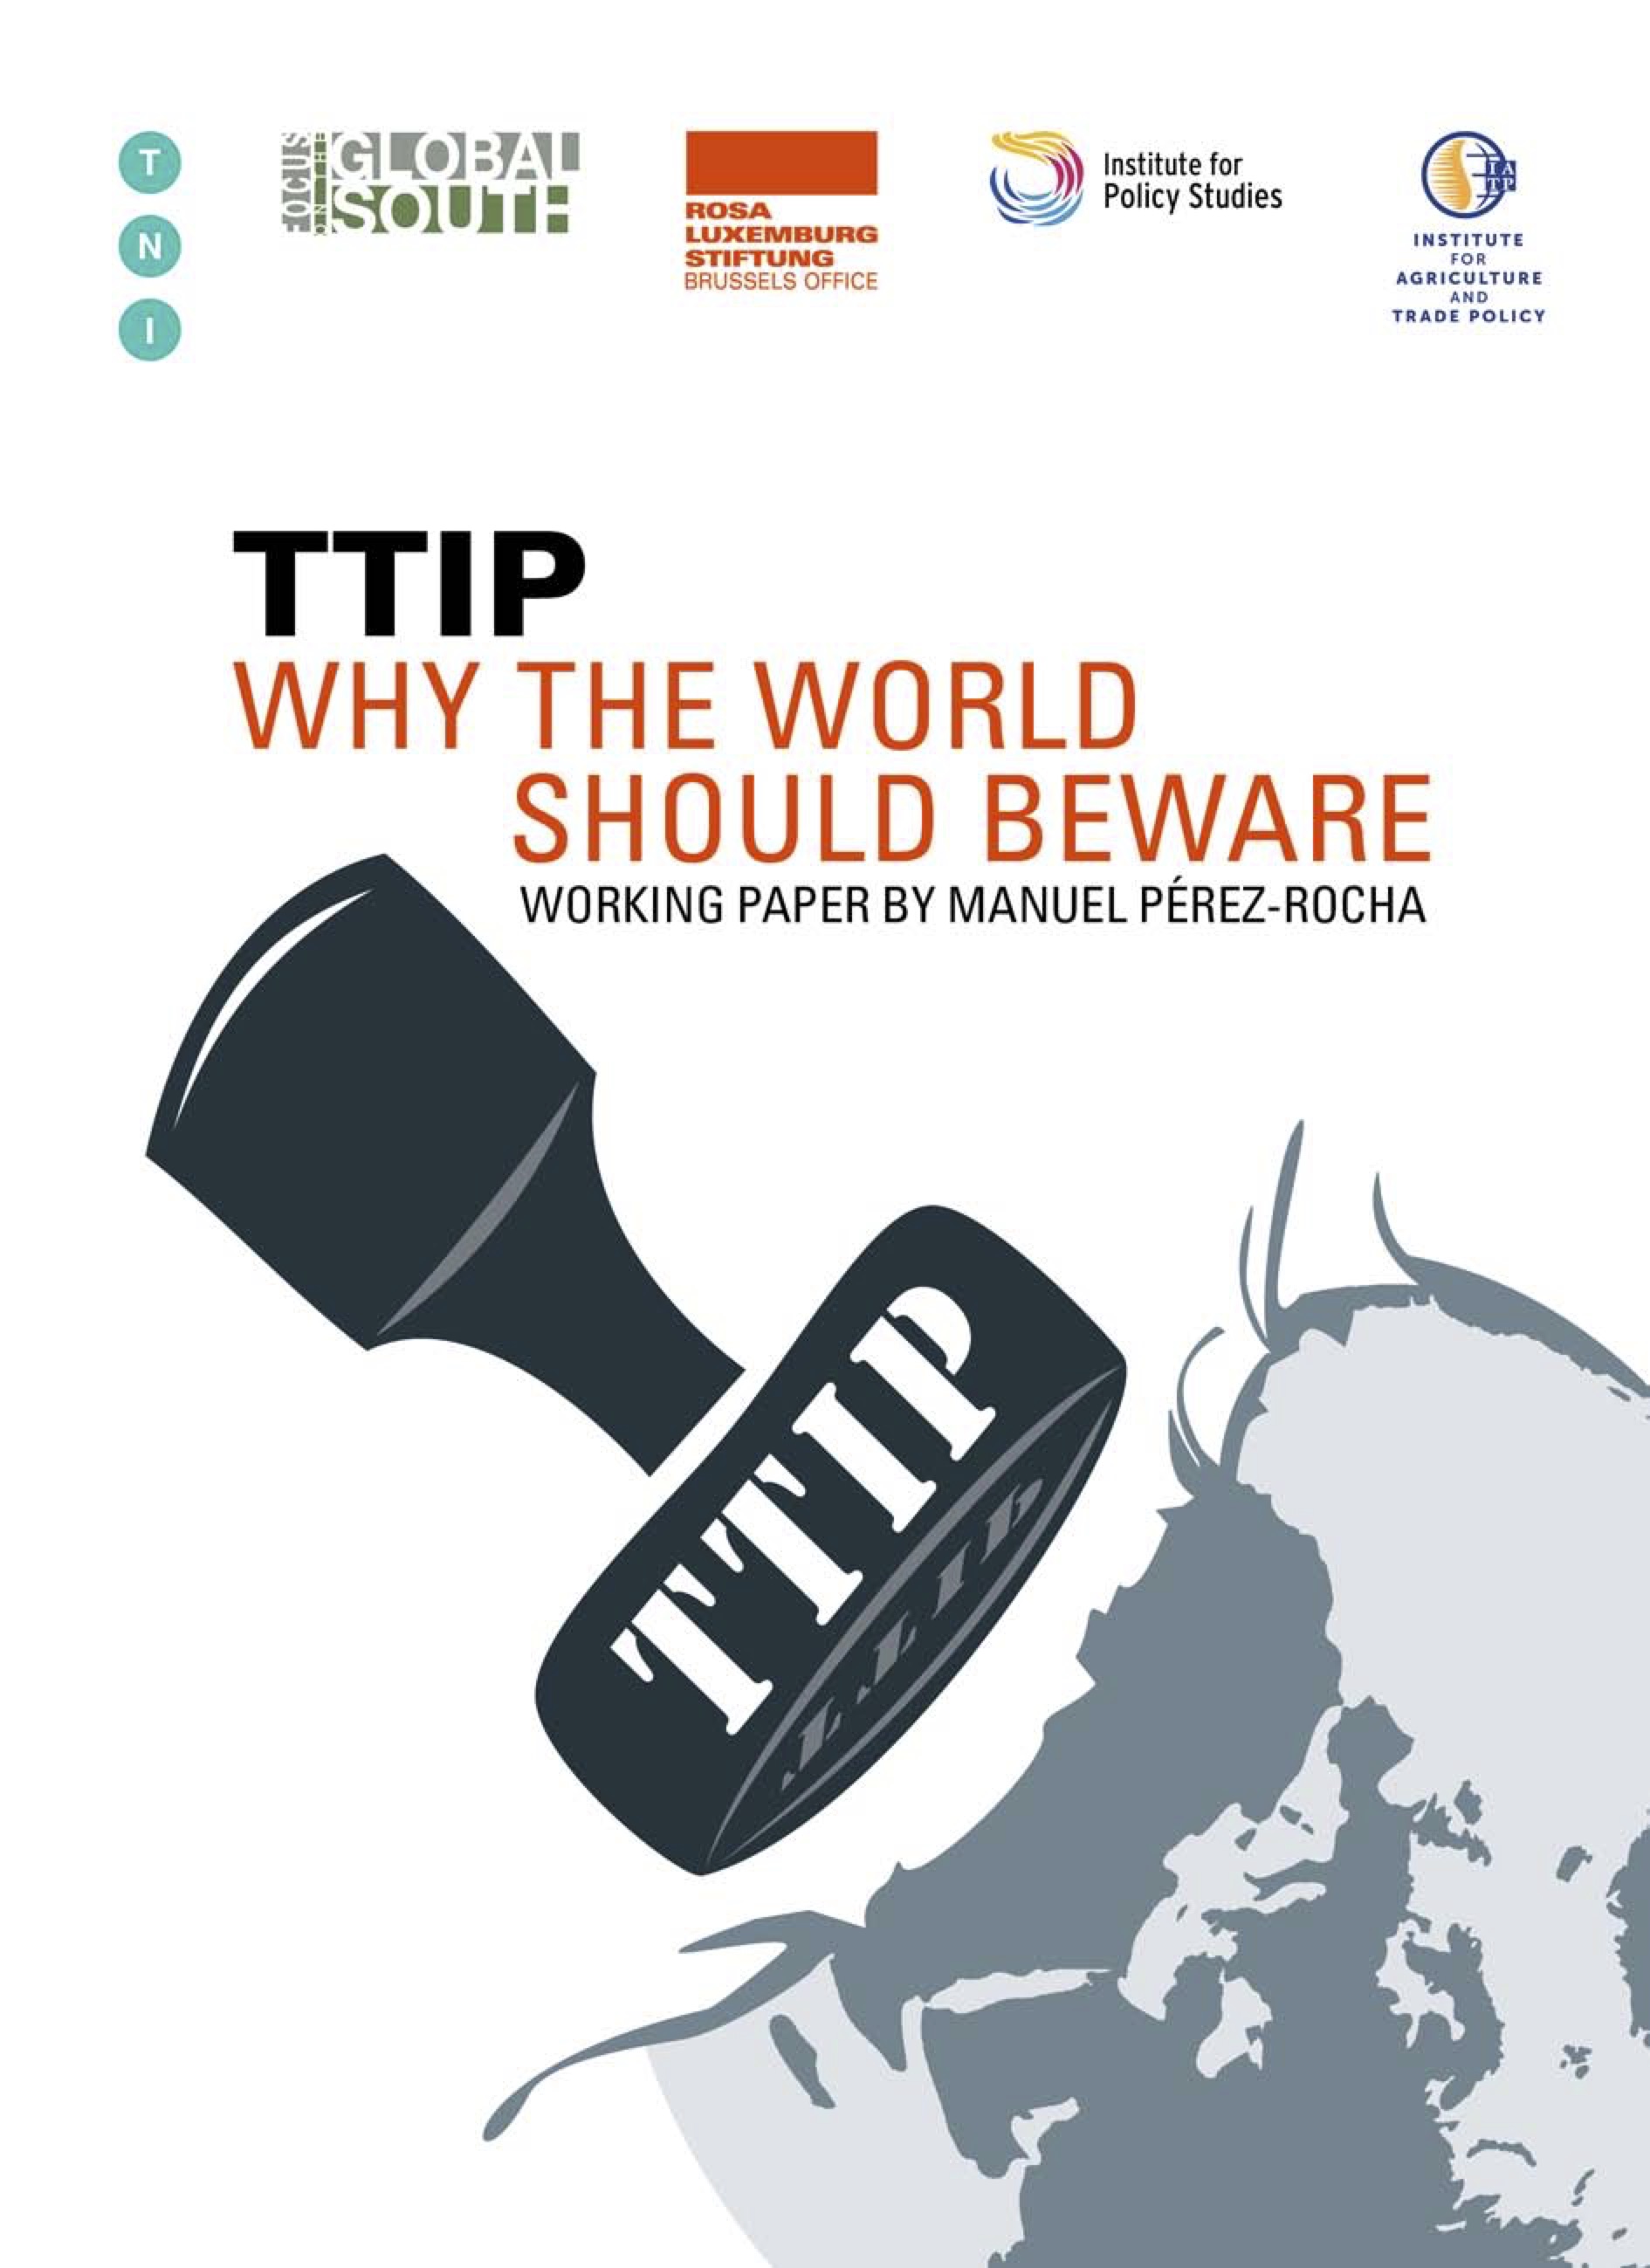 TTIP – Why the World Should Beware